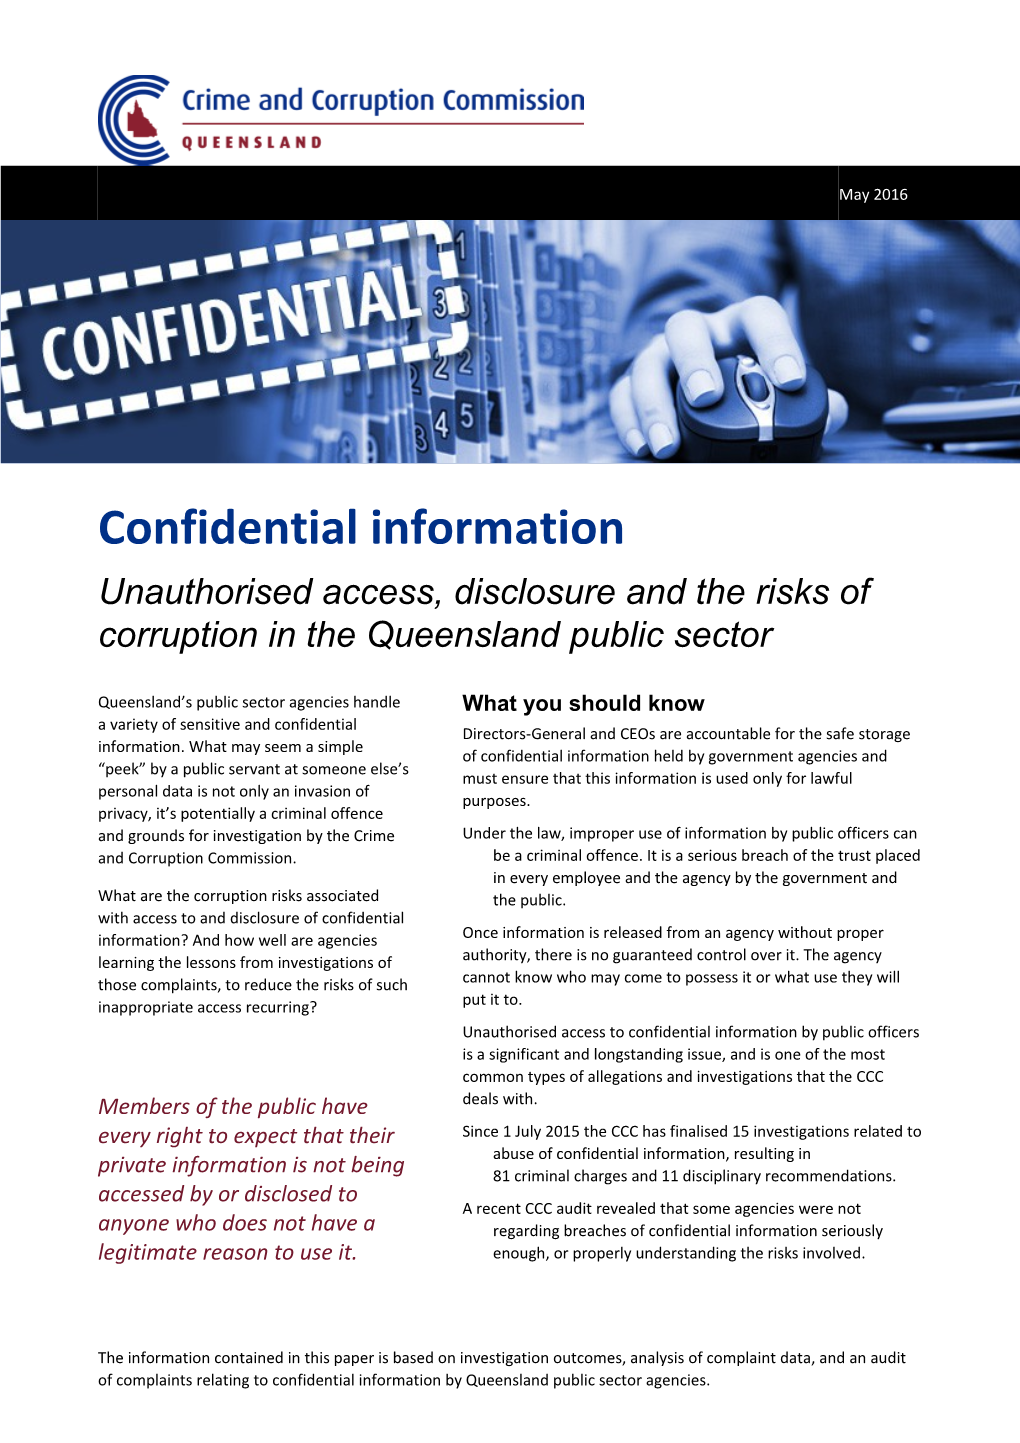 Confidential Information Paper